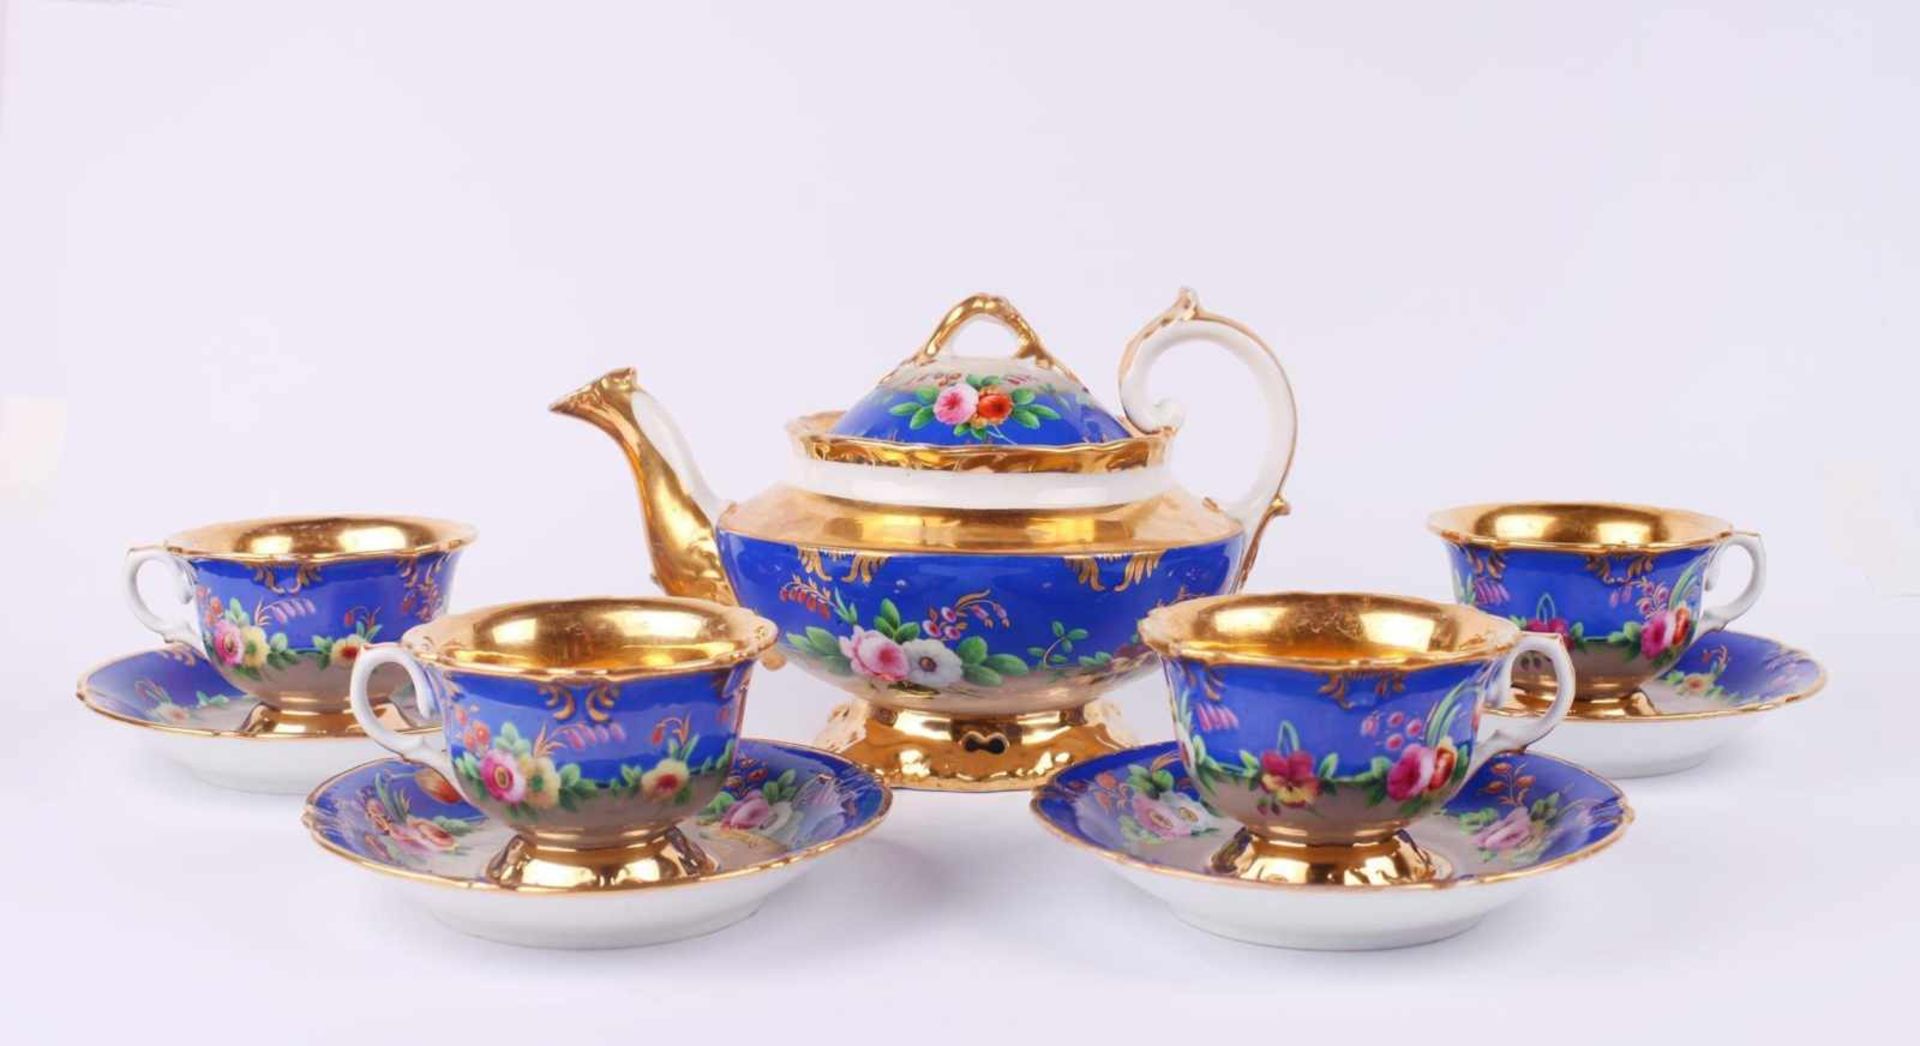 Tea set. 16 pieces: six tea cup and saucer sets, one teapot, one sugar bowl, one milk jug, one dish. - Image 15 of 27